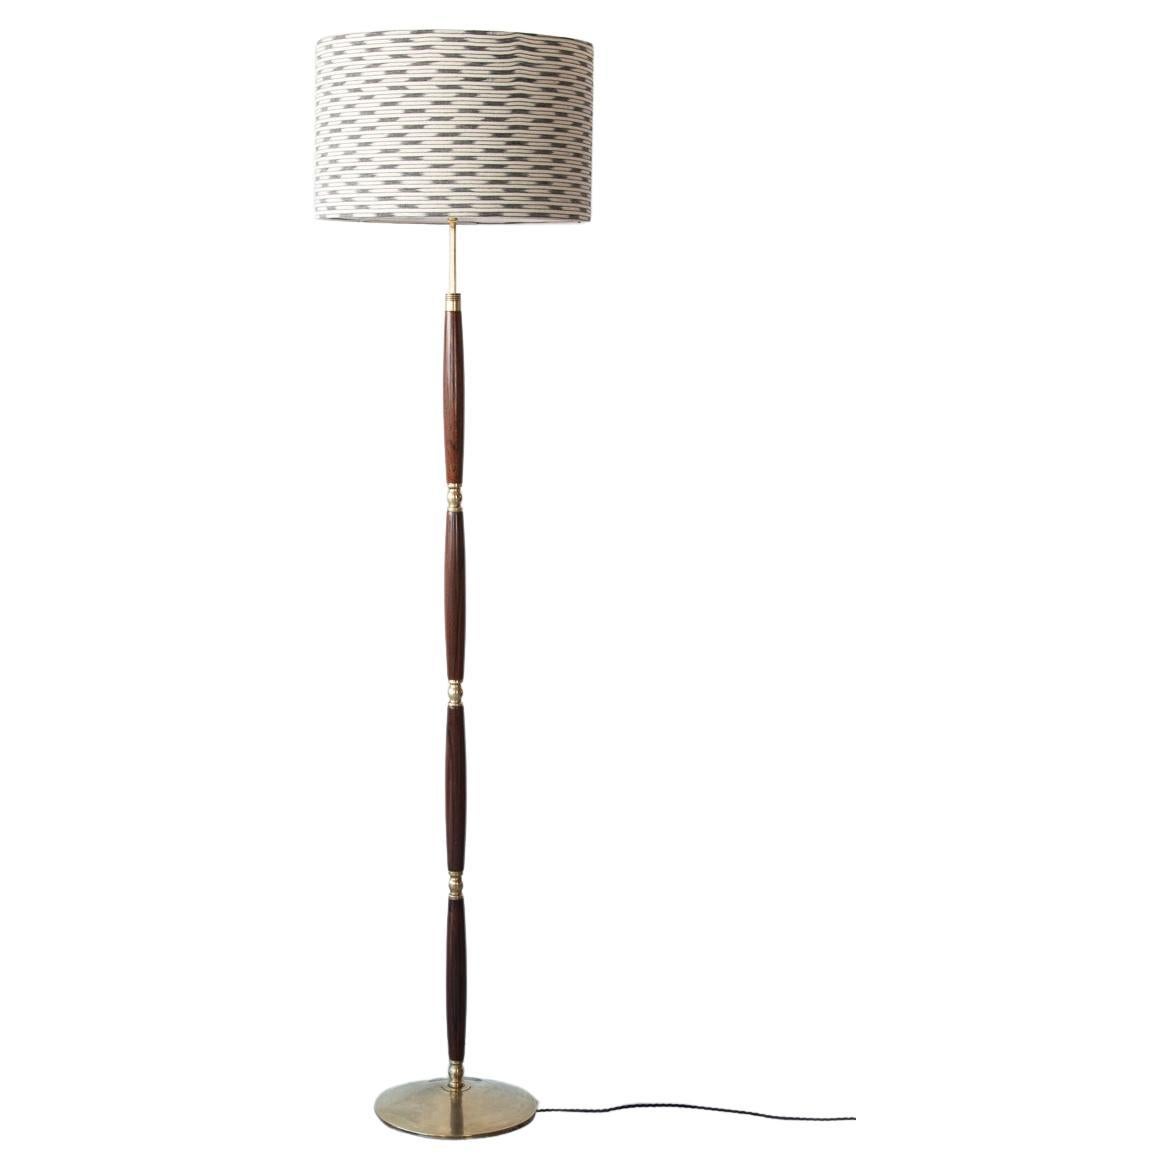 Rosewood and Brass Floor Lamp Made in Denmark in the 1960's, Mid Century